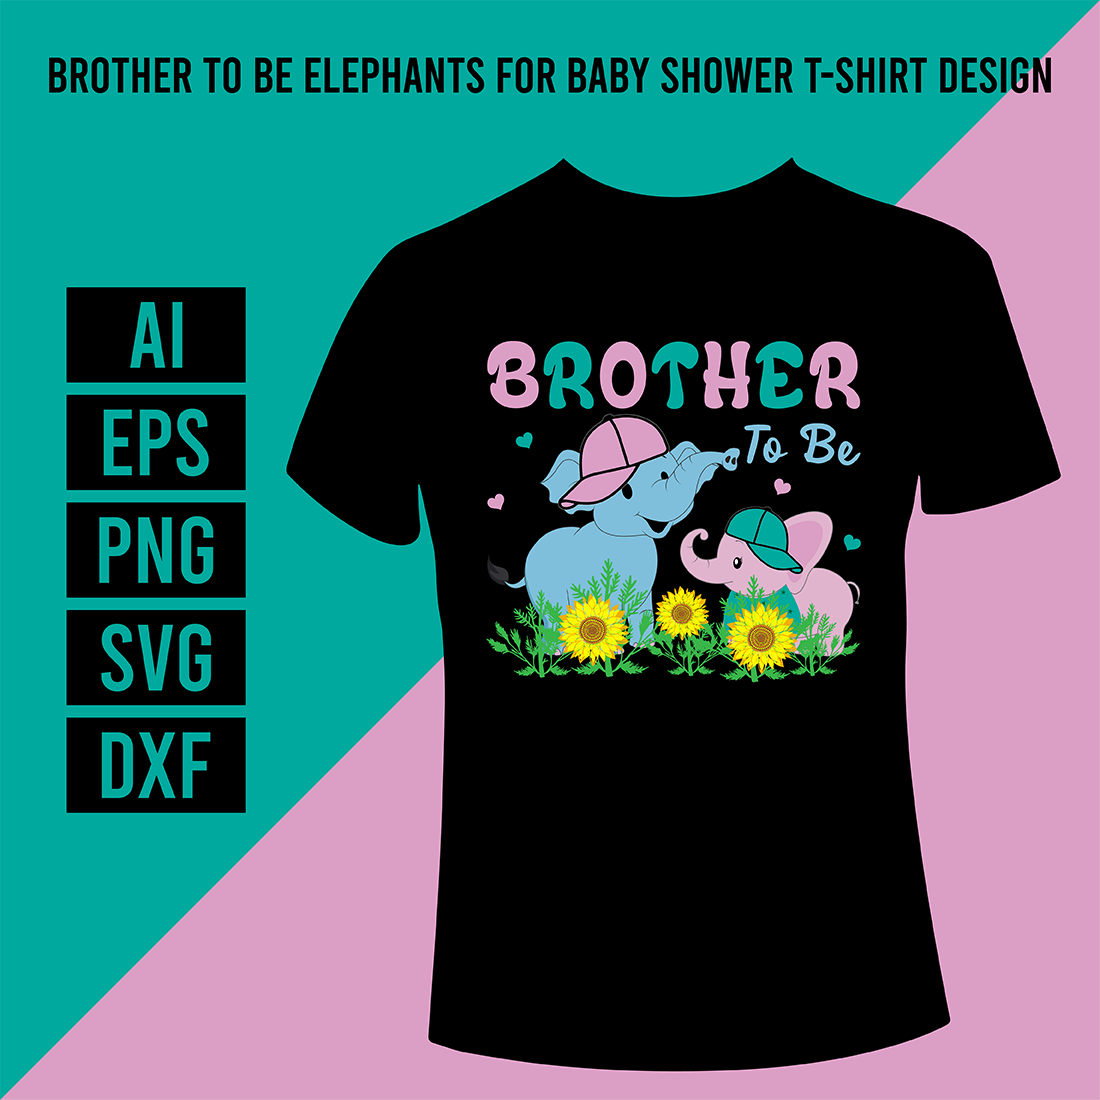 Brother To Be Elephants For Baby Shower T-Shirt Design cover image.